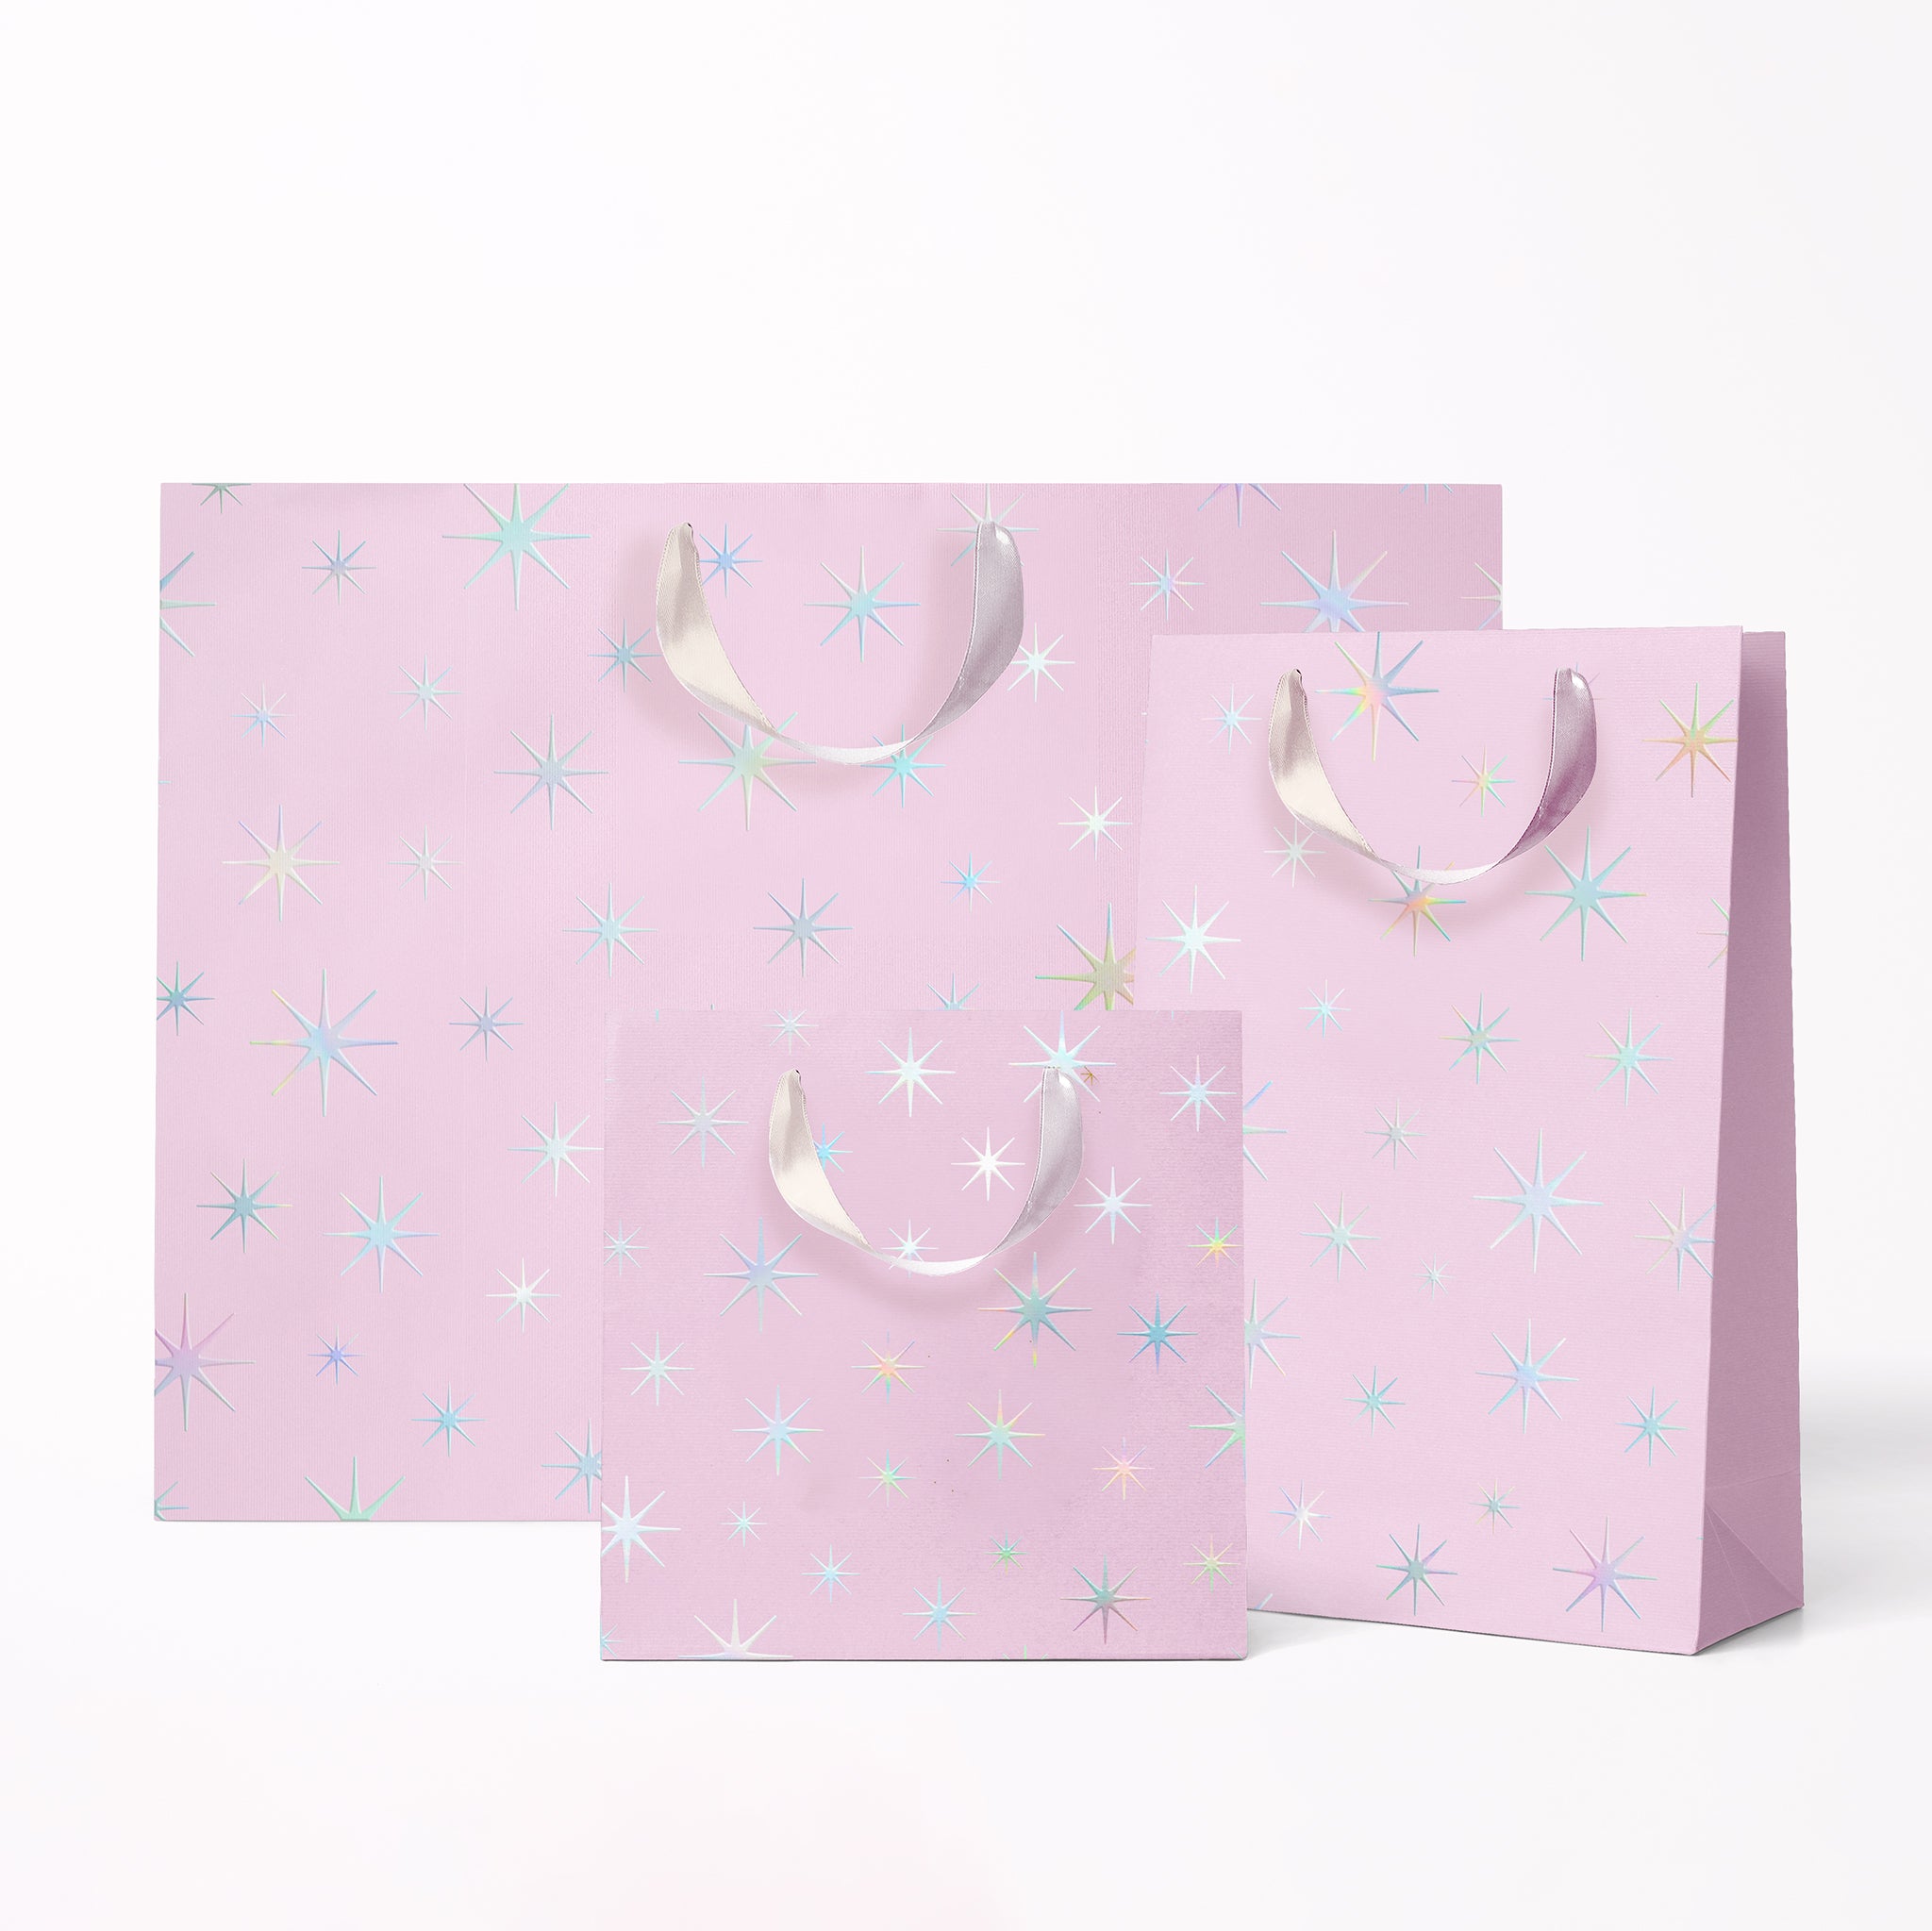 On a white background is three different sized light purple gift bags with a silver star pattern and silver ribbon handles. 